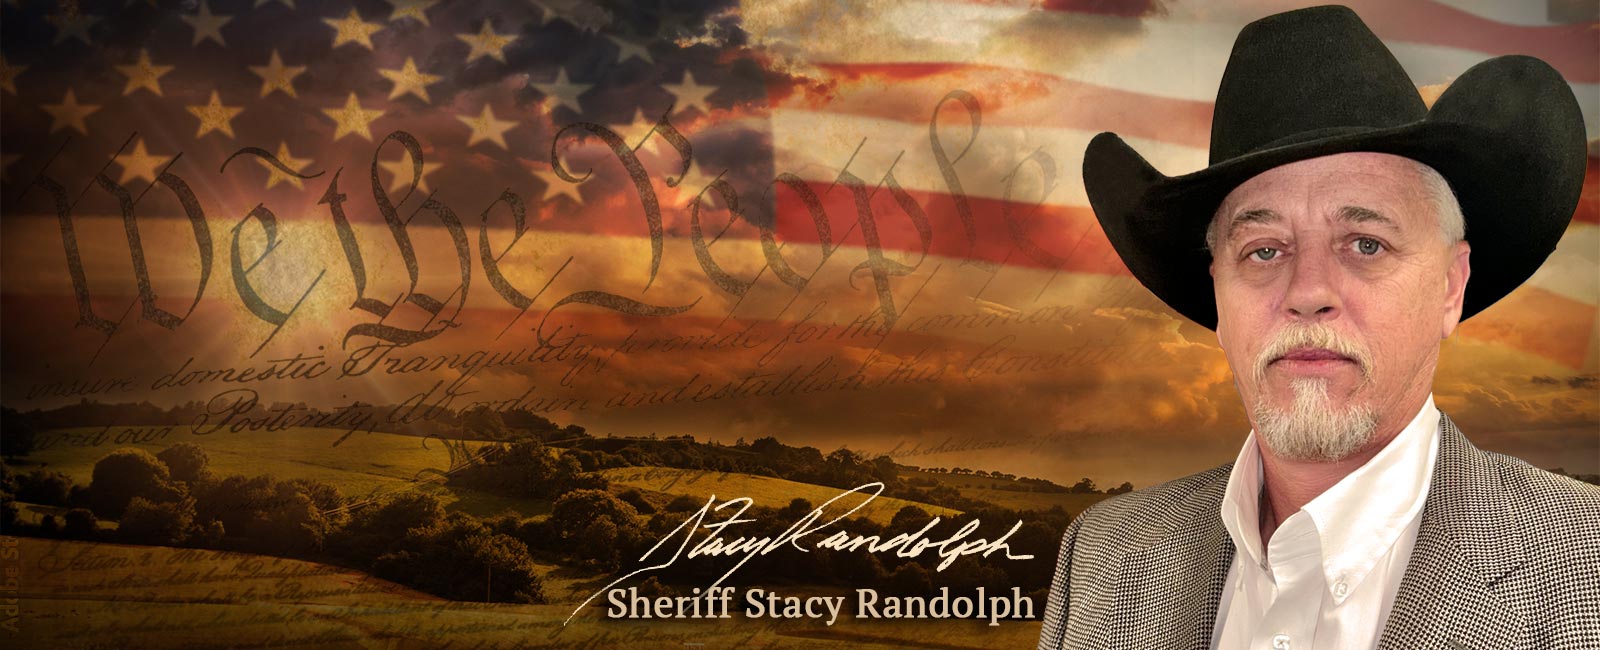 sheriff randolph with flag and constitution graphical background